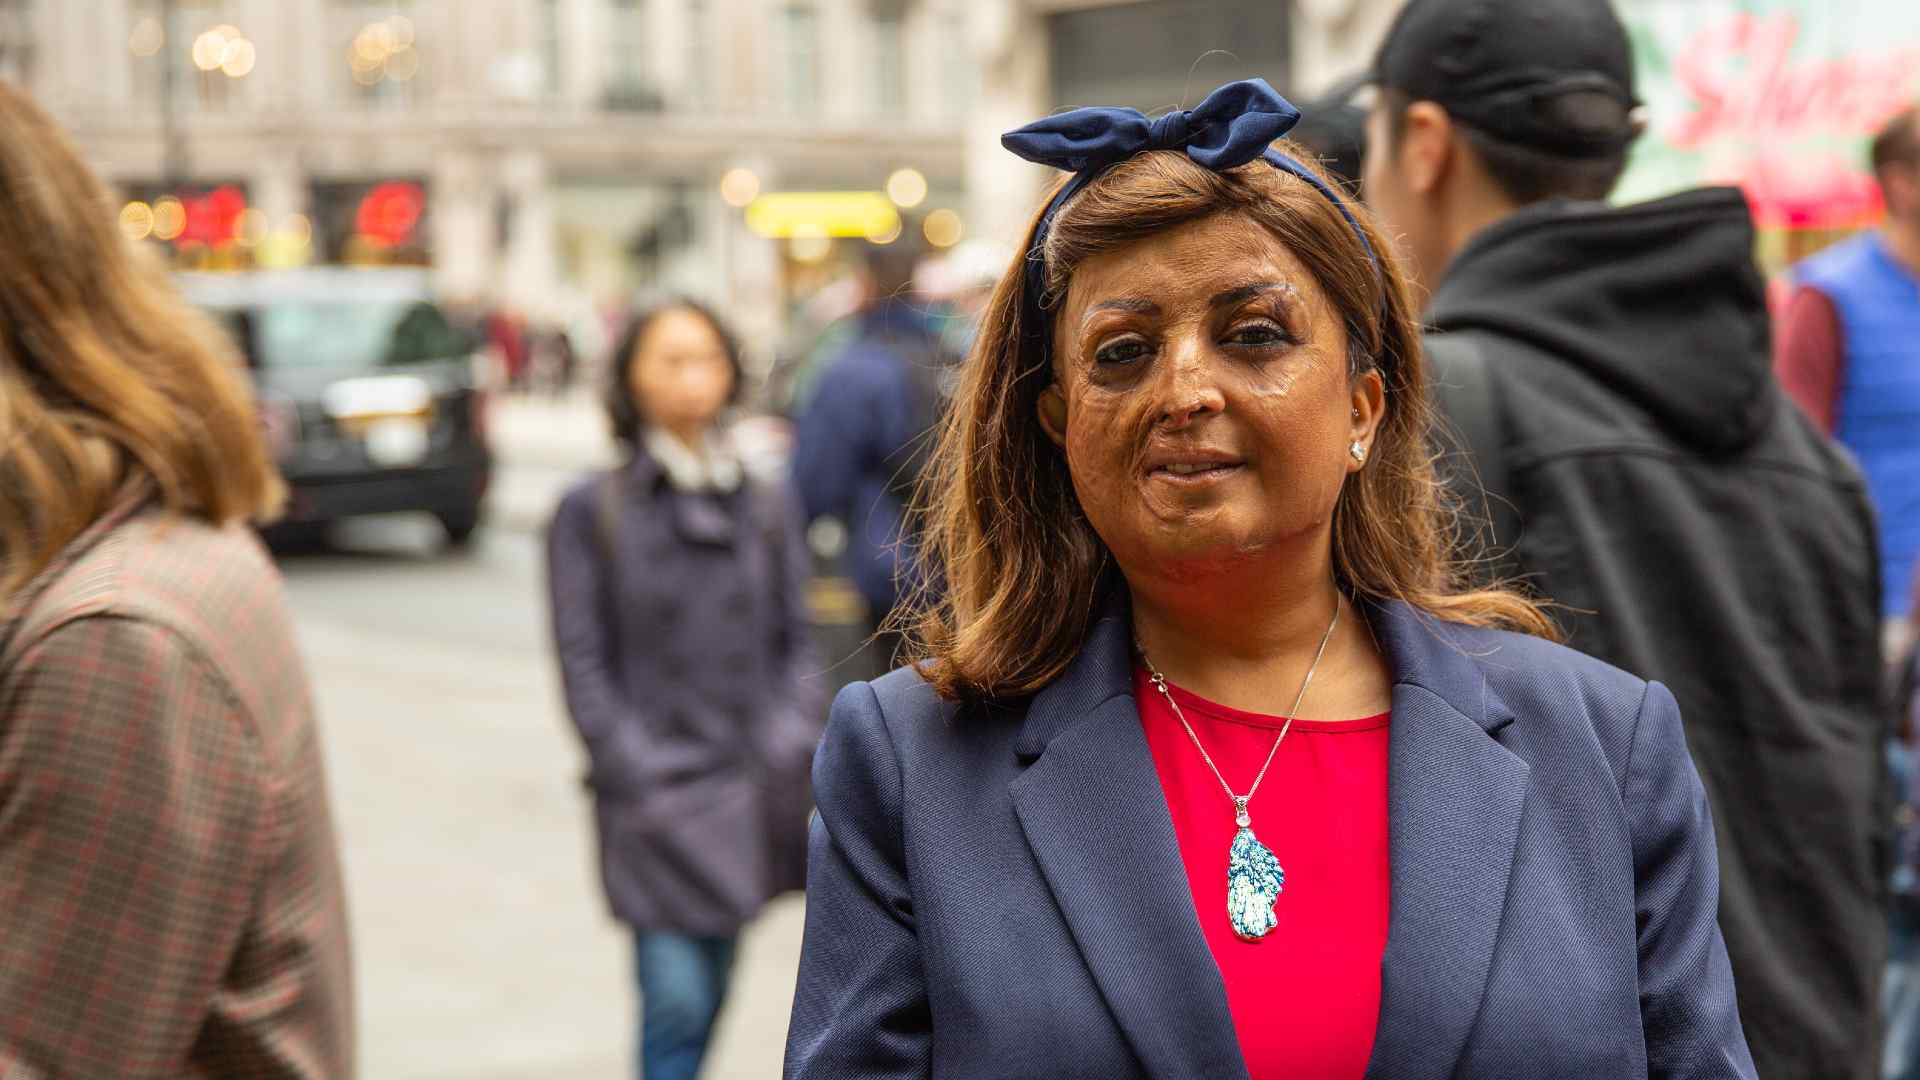 A woman with facial burns standing in a busy street